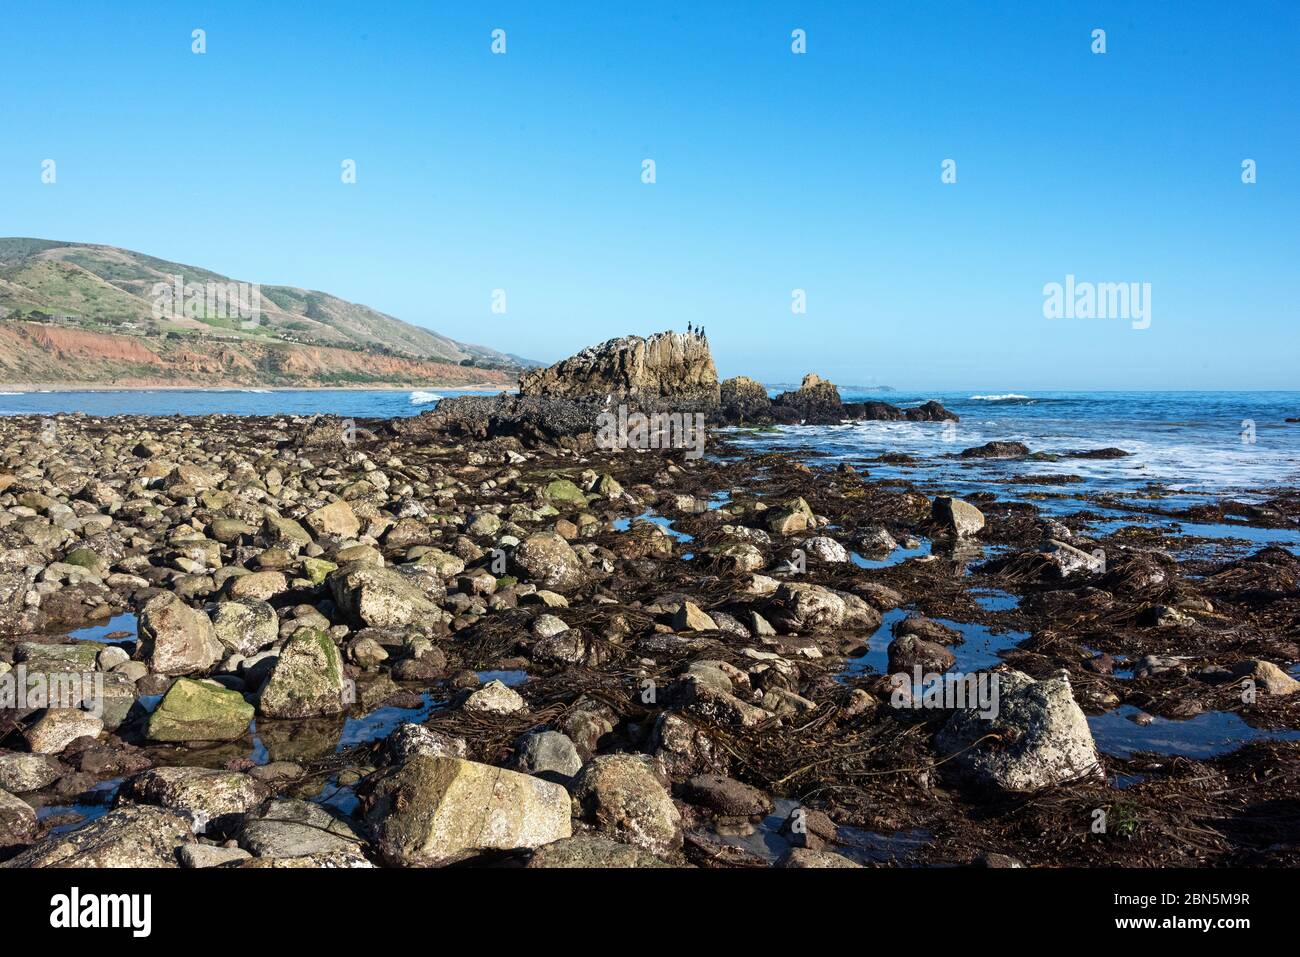 Three cormorants perch on top of a large rock outcrop during low tide at Leo Carrillo State beach, Malibu, California. Stock Photo